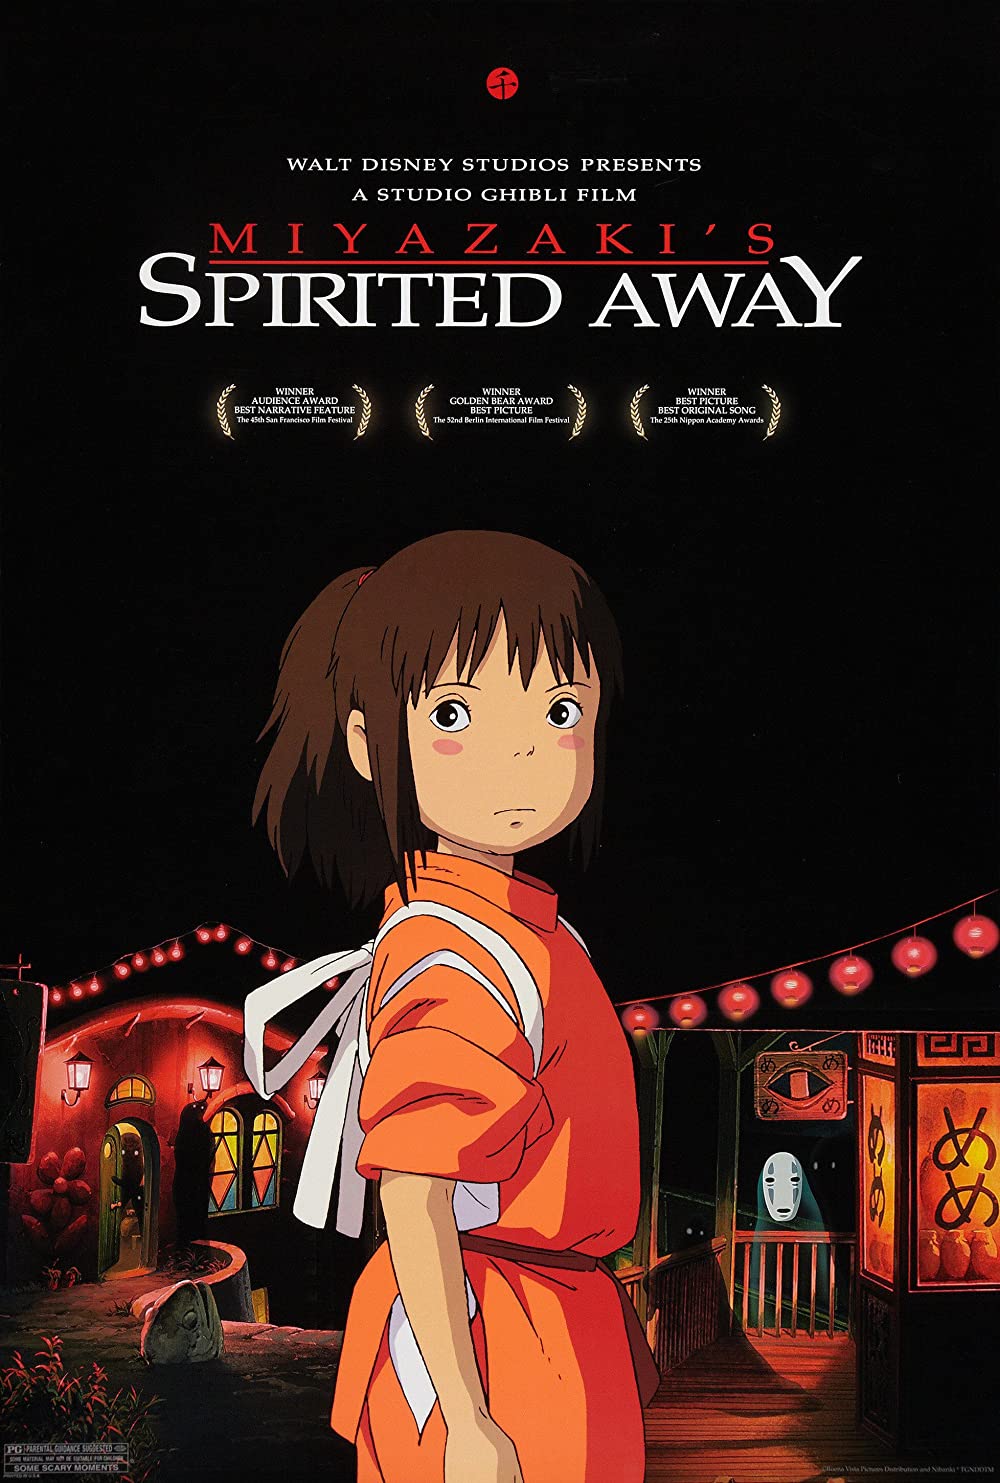 Spirited-Away -best-anime-movies-on-netflix - Pop Culture, Entertainment,  Humor, Travel & More